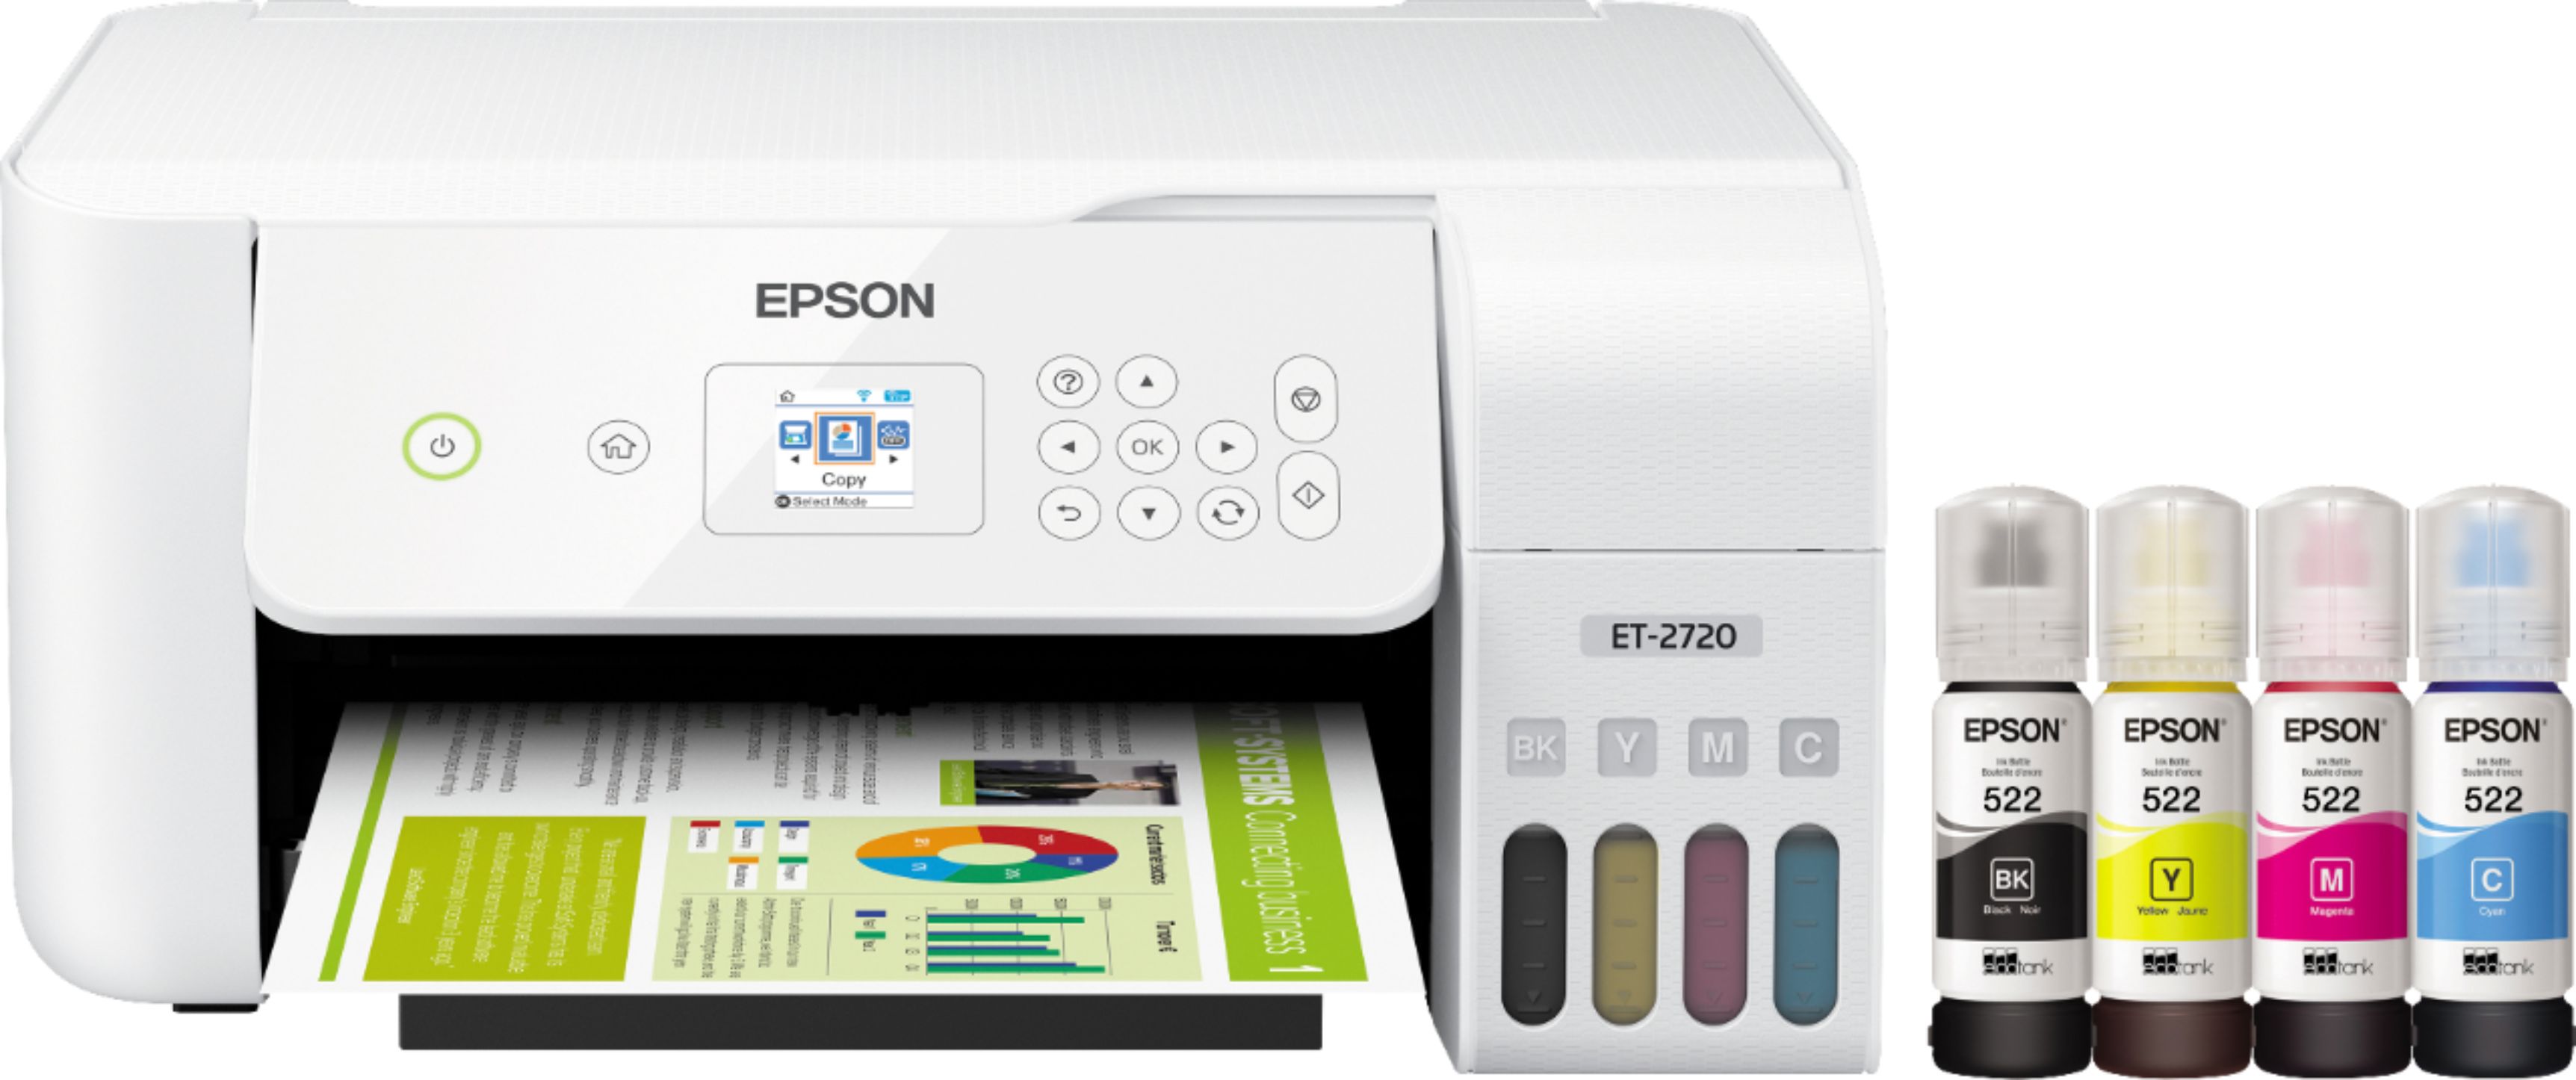 Questions and Answers: Epson EcoTank ET-2720 Wireless All-In-One Inkjet  Printer White ECOTANK ET-2720 PRINTER C11CH4 - Best Buy